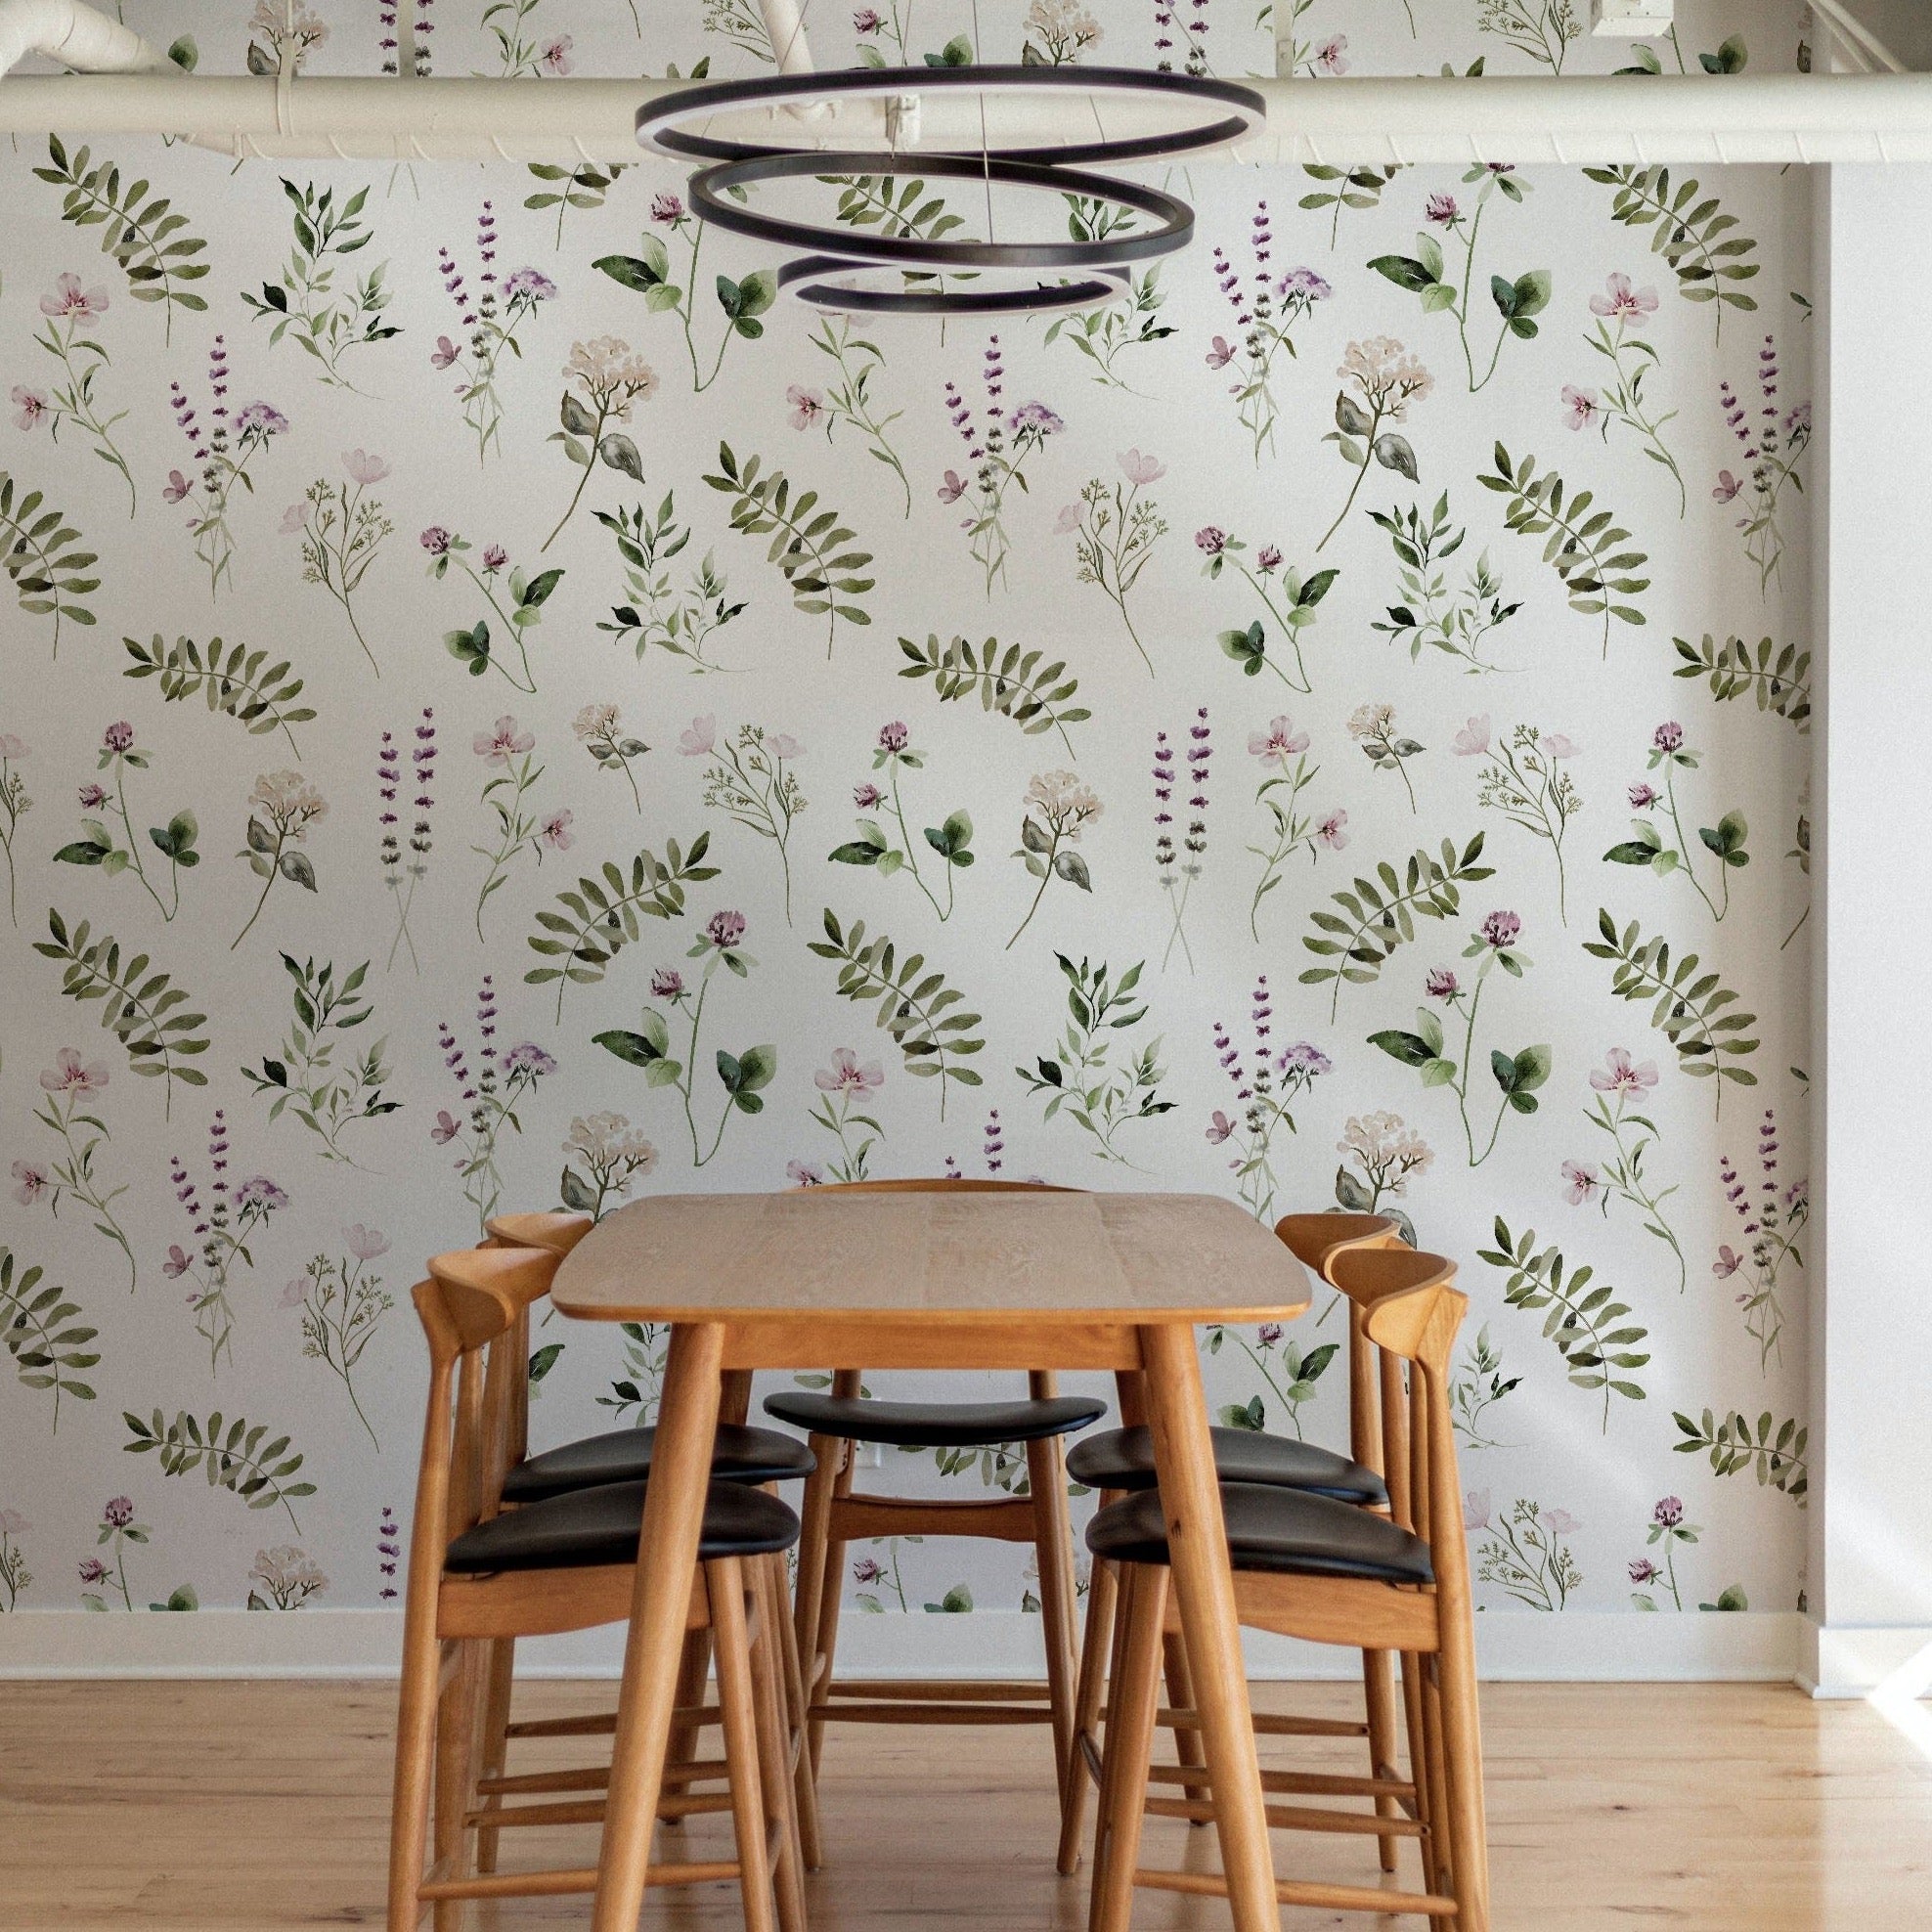 A dining area featuring walls covered with "Midsummer Watercolour Floral & Fern Wallpaper." The room is furnished with a simple wooden dining table and chairs, with the wallpaper providing a lively backdrop of green ferns and pastel flowers, creating a calming and inviting environment.